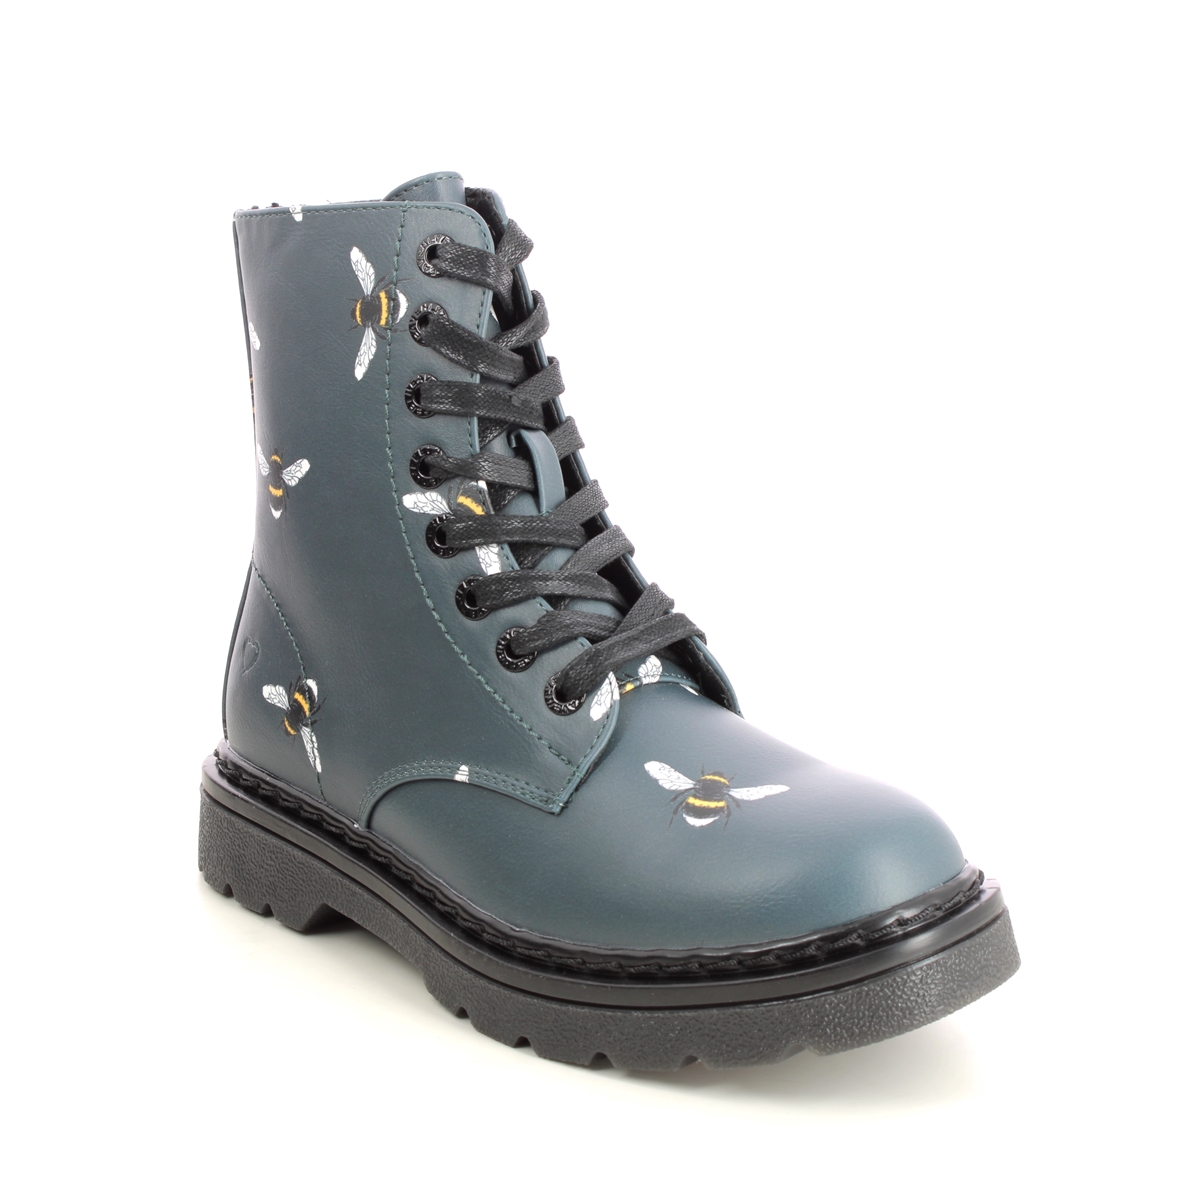 Heavenly Feet Justina 2 Bee Teal Blue Womens Biker Boots 3501-73 In Size 4 In Plain Teal Blue